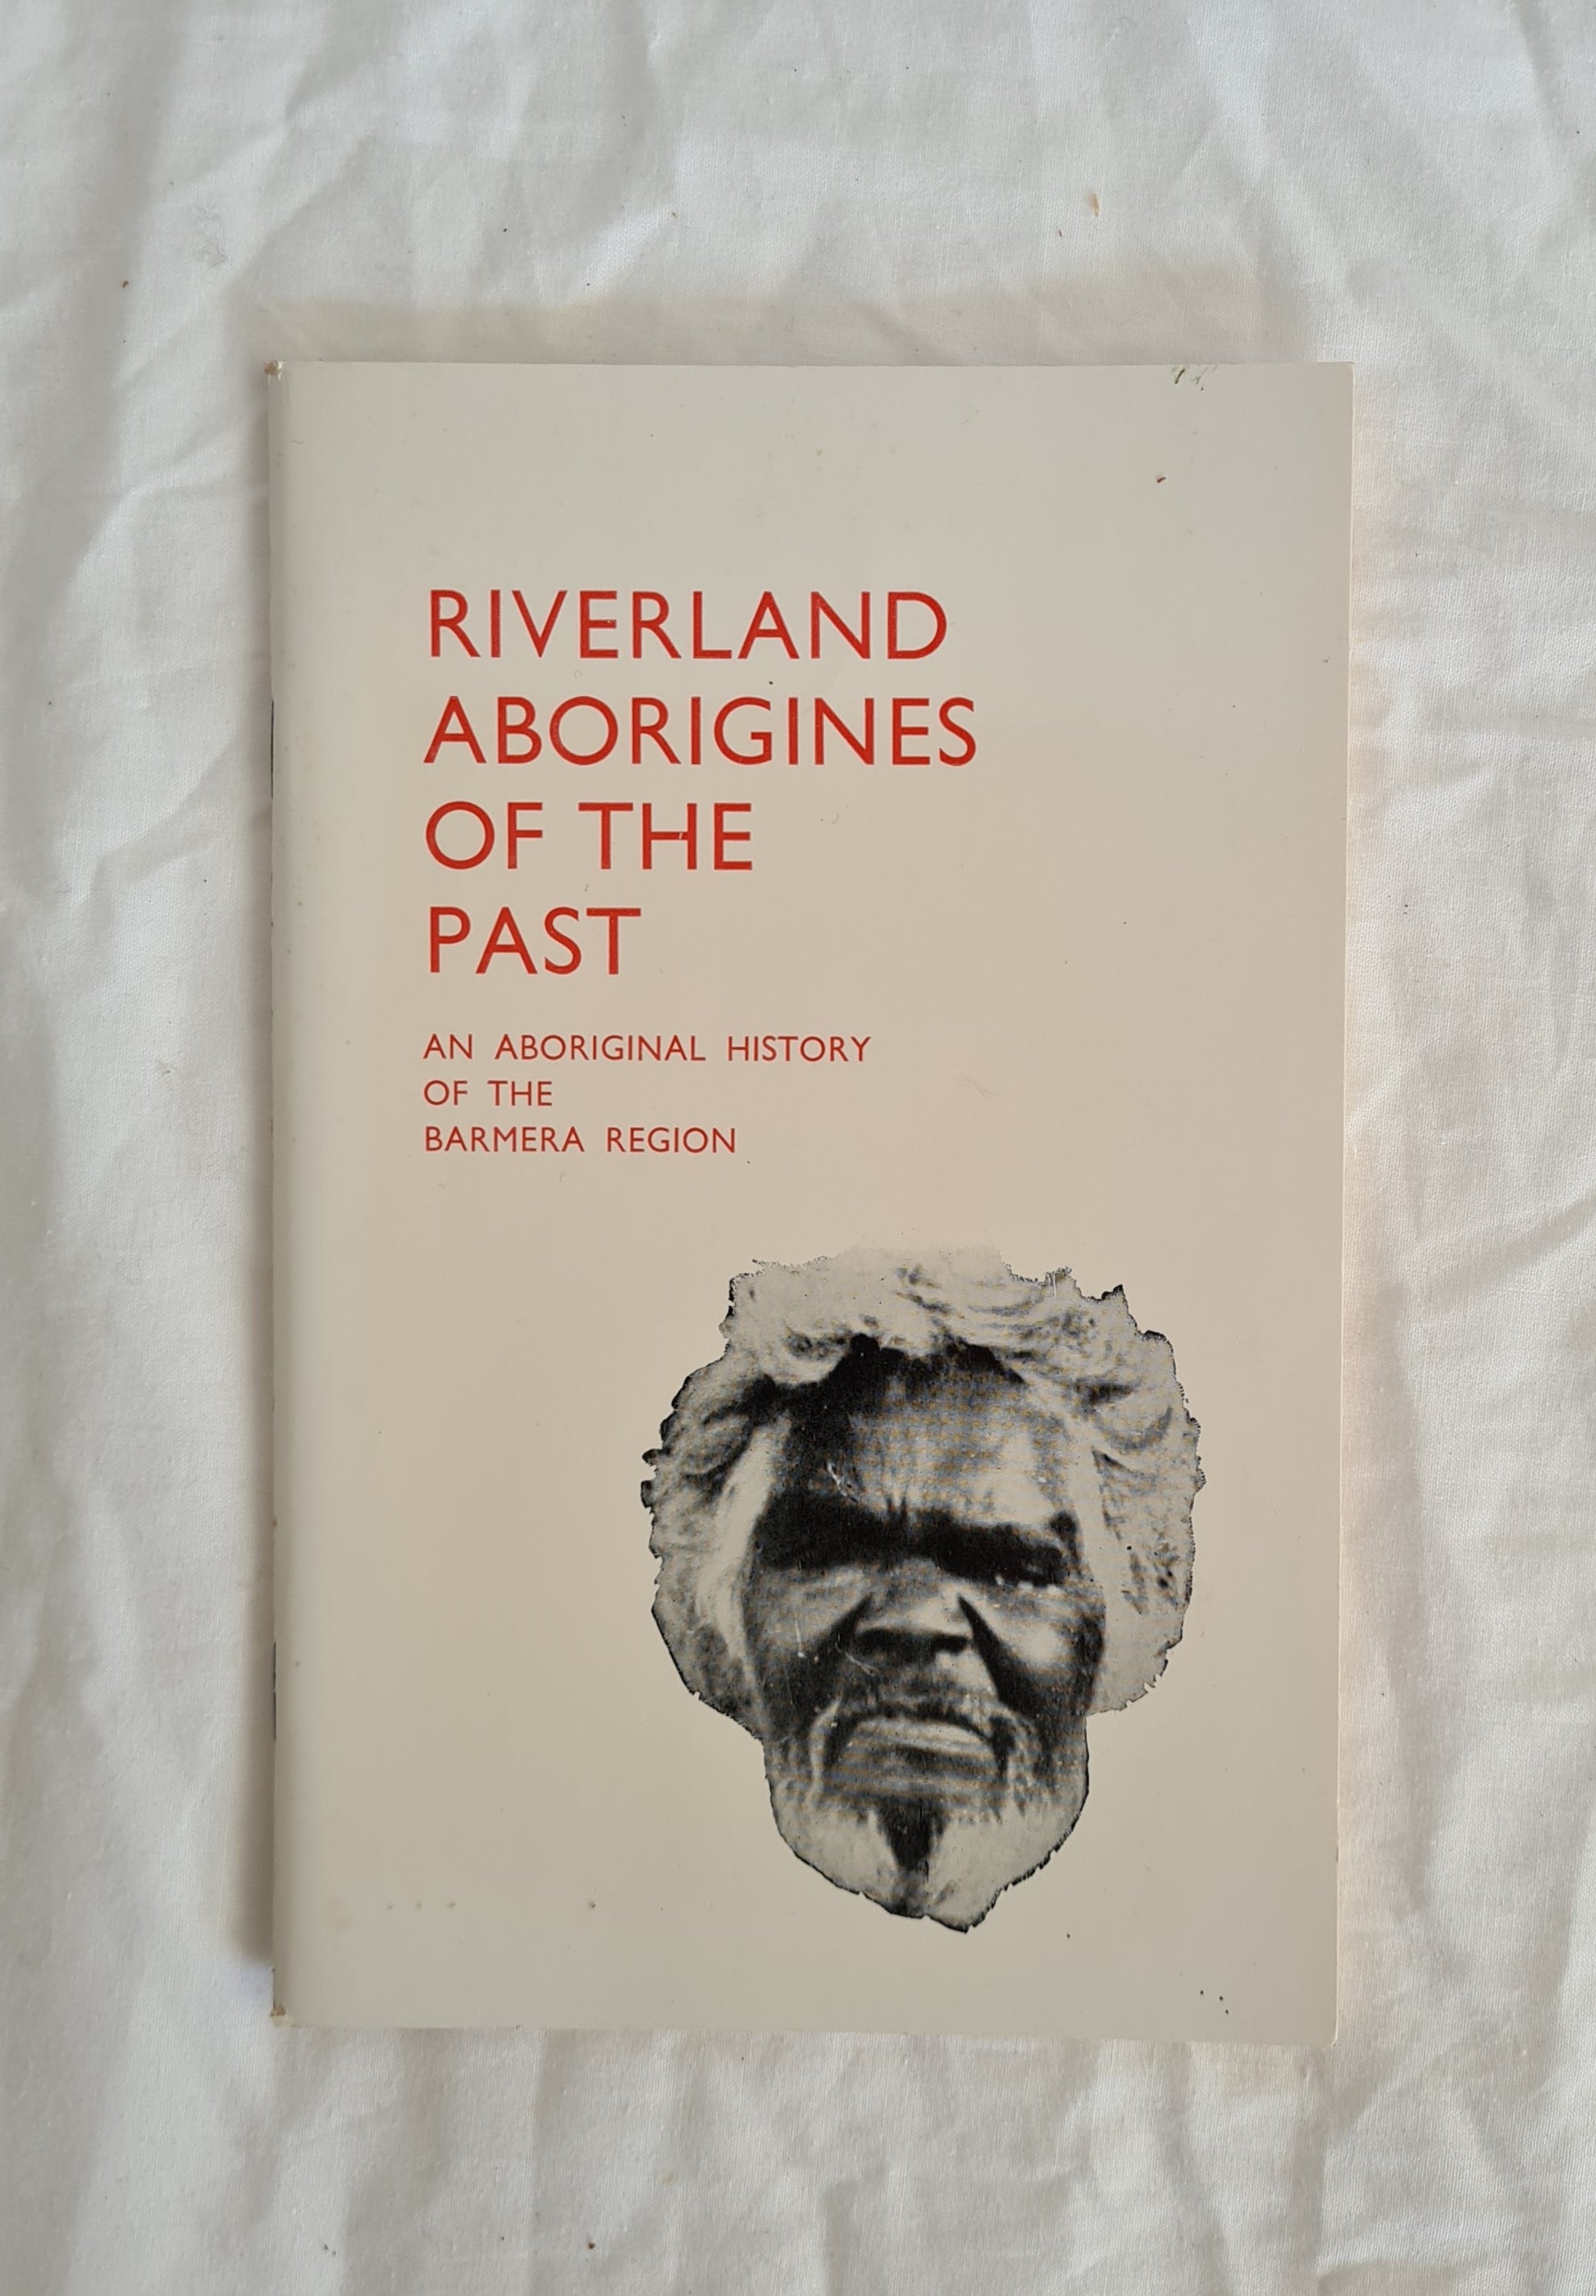 Riverland Aborigines of the Past  An Aboriginal History of the Barmera Region  by George Woolmer